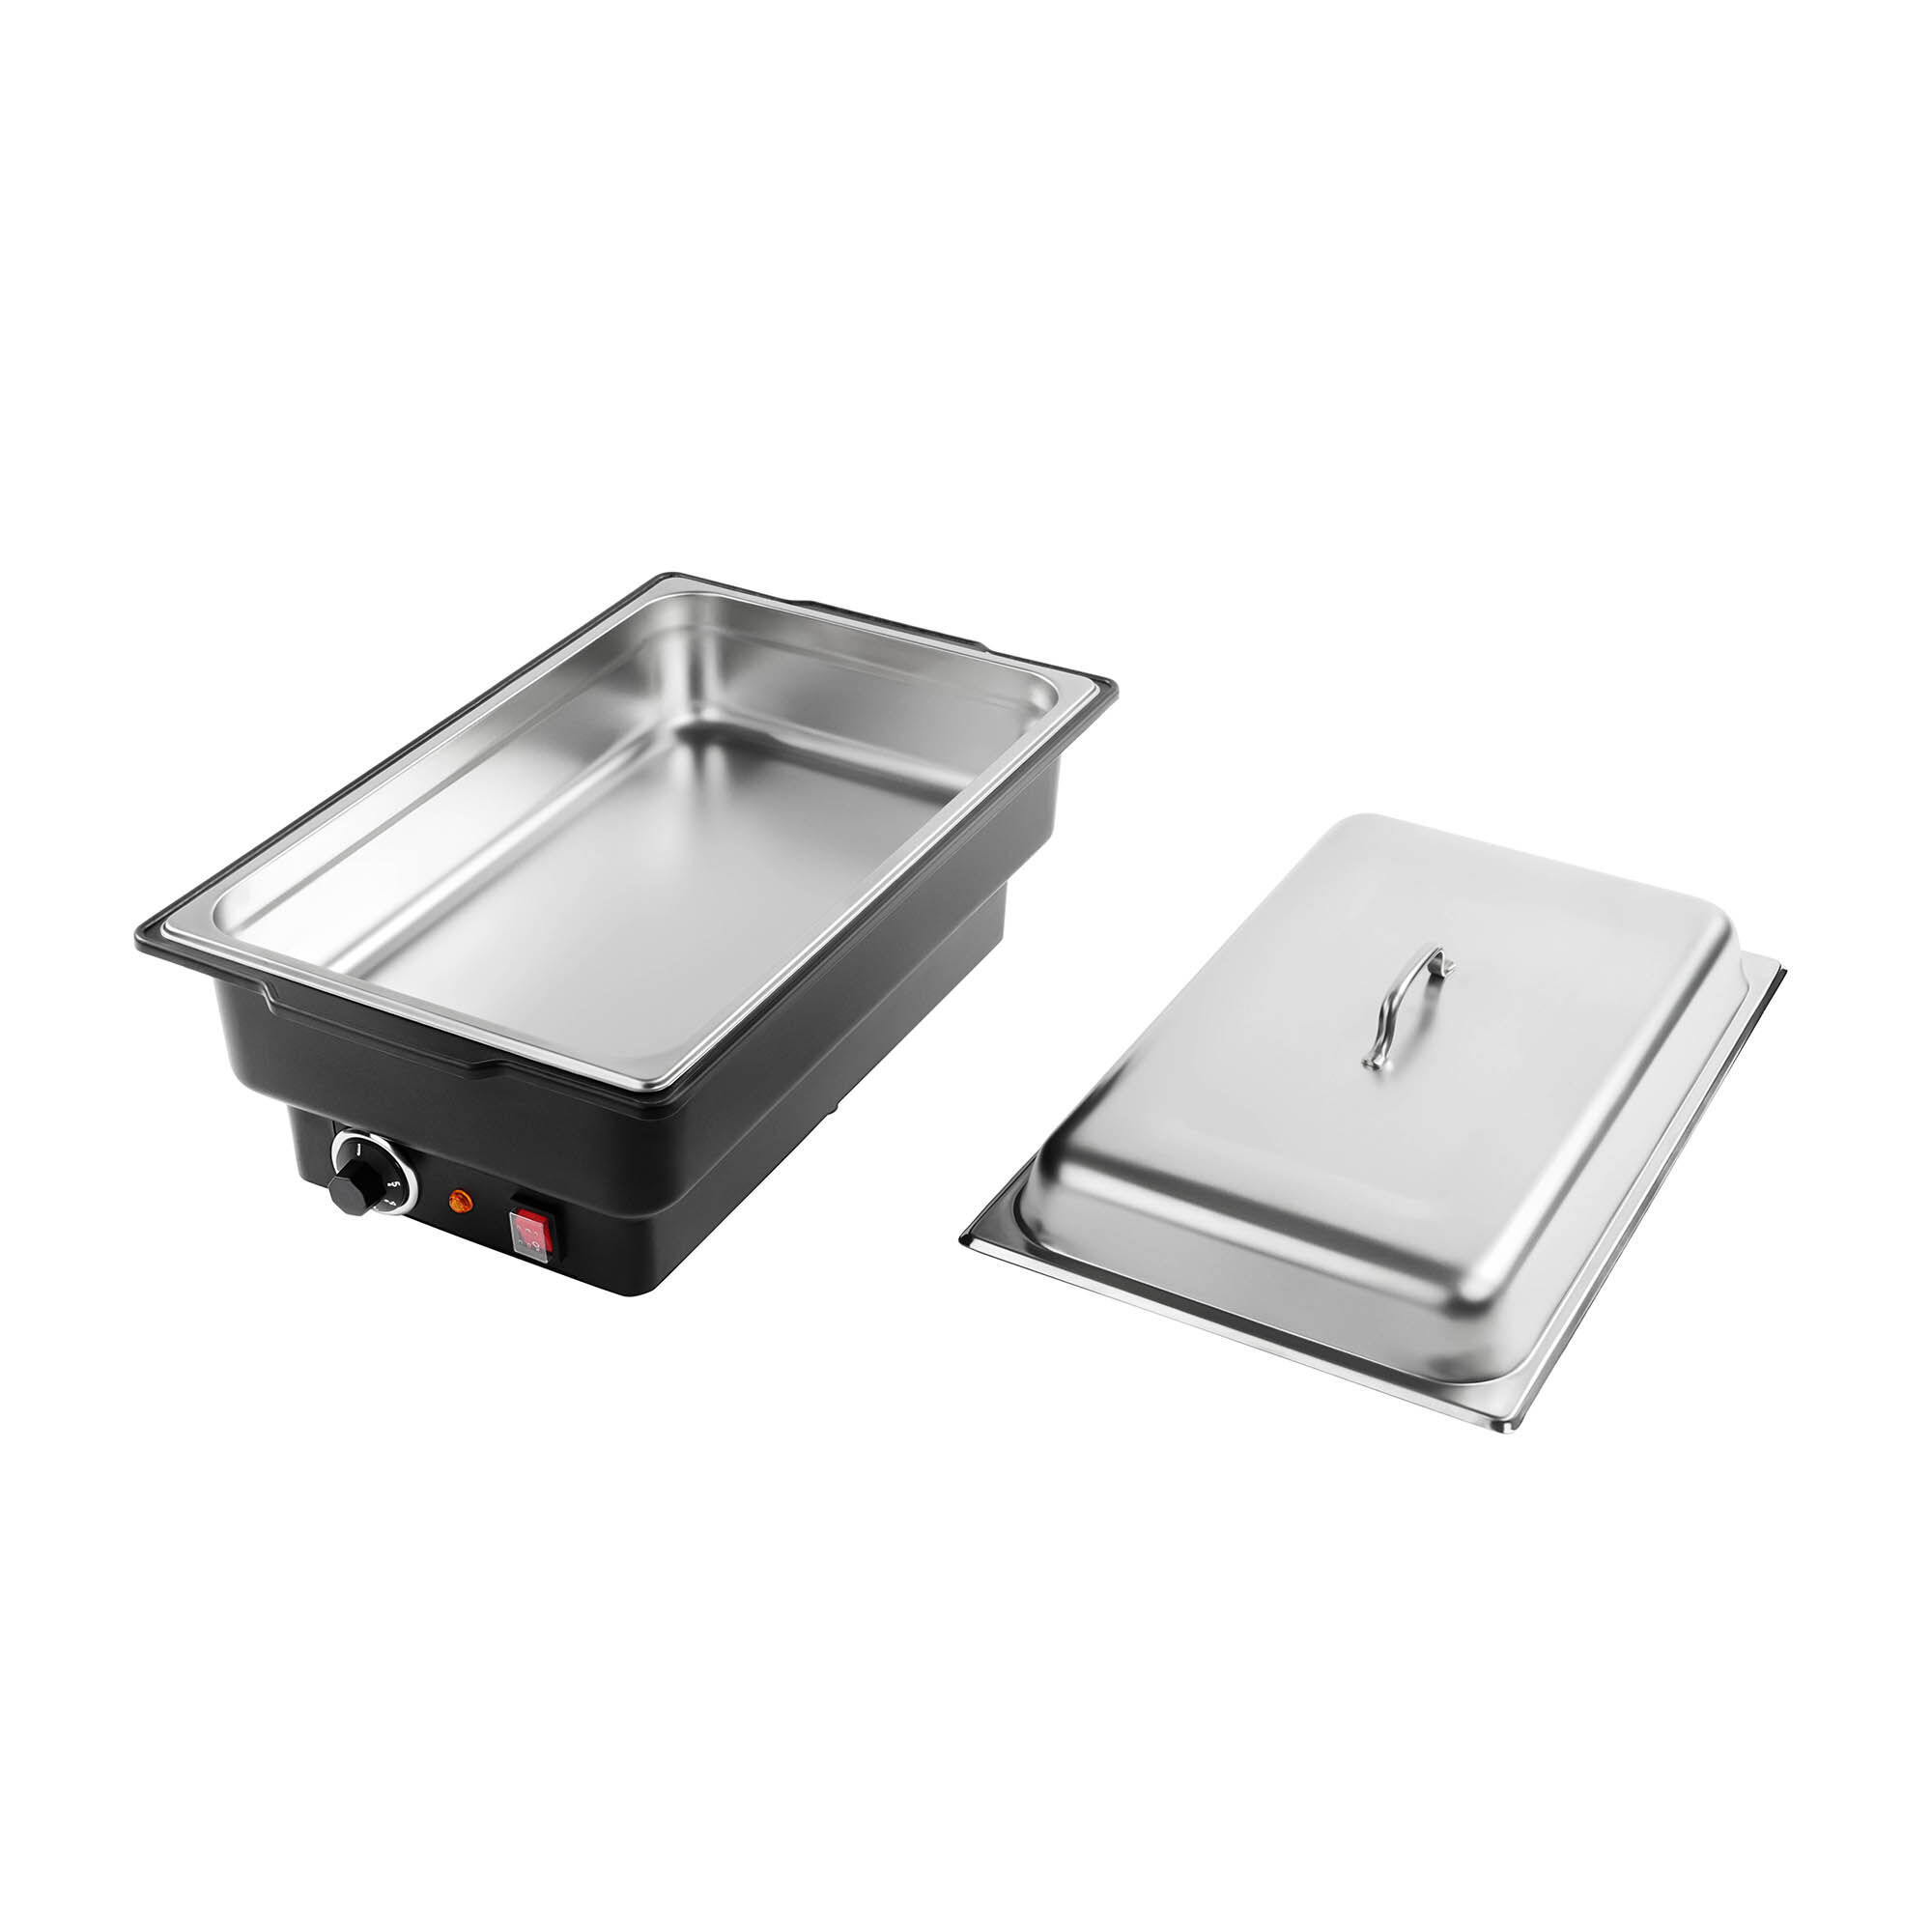 Royal Catering Chafing Dish - 900 W - GN 1/1 Container - 100 mm 10010147